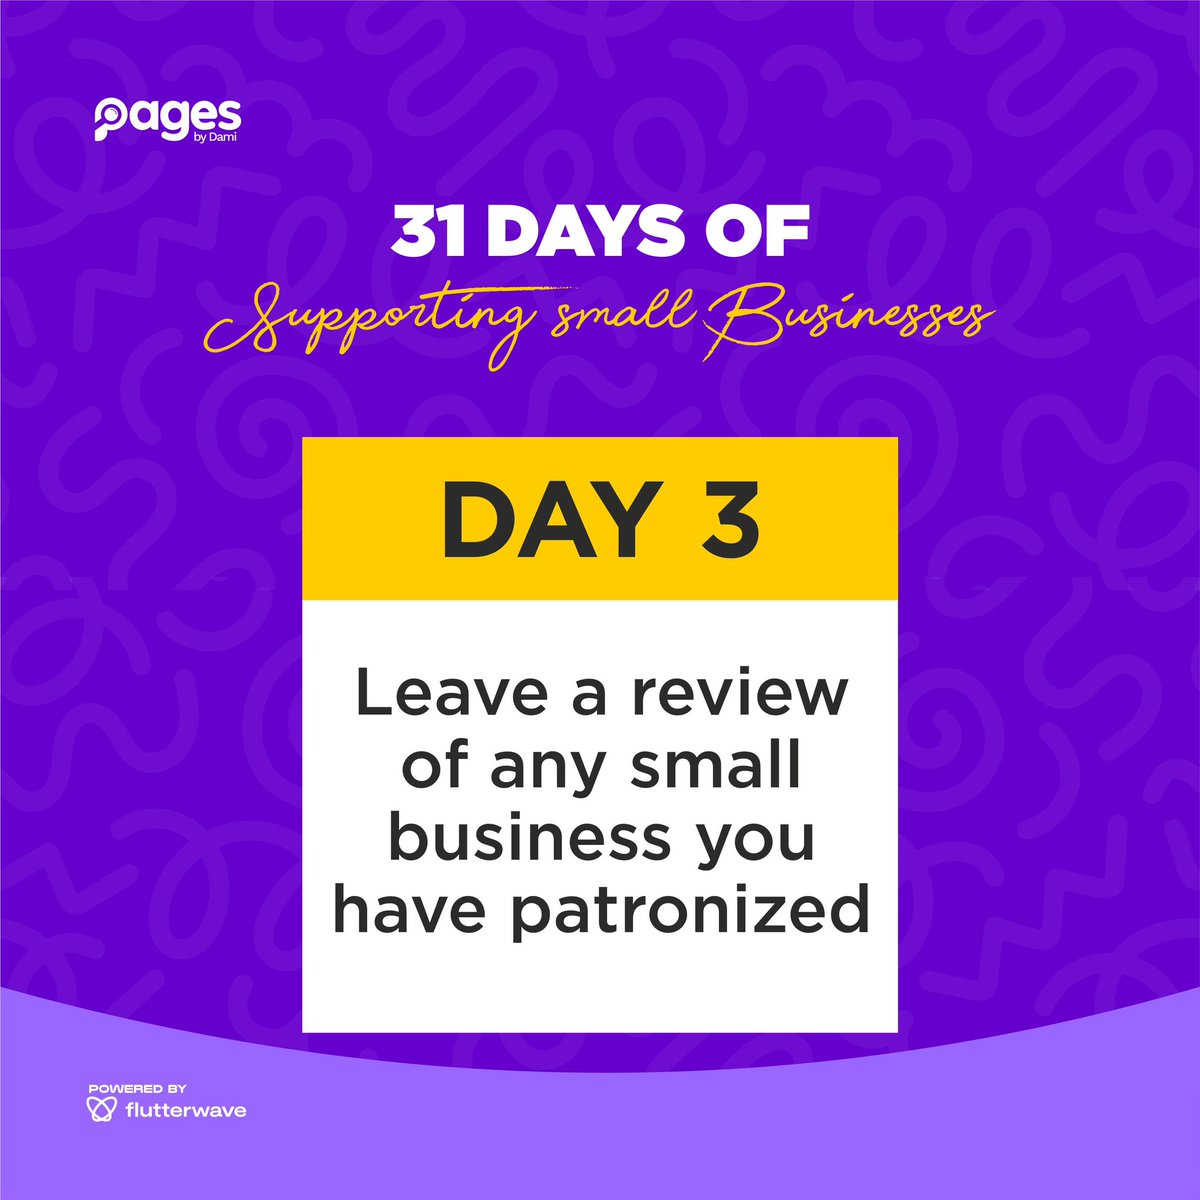 Day 3! Leave a review of any small business you have patronizedddddd!!!